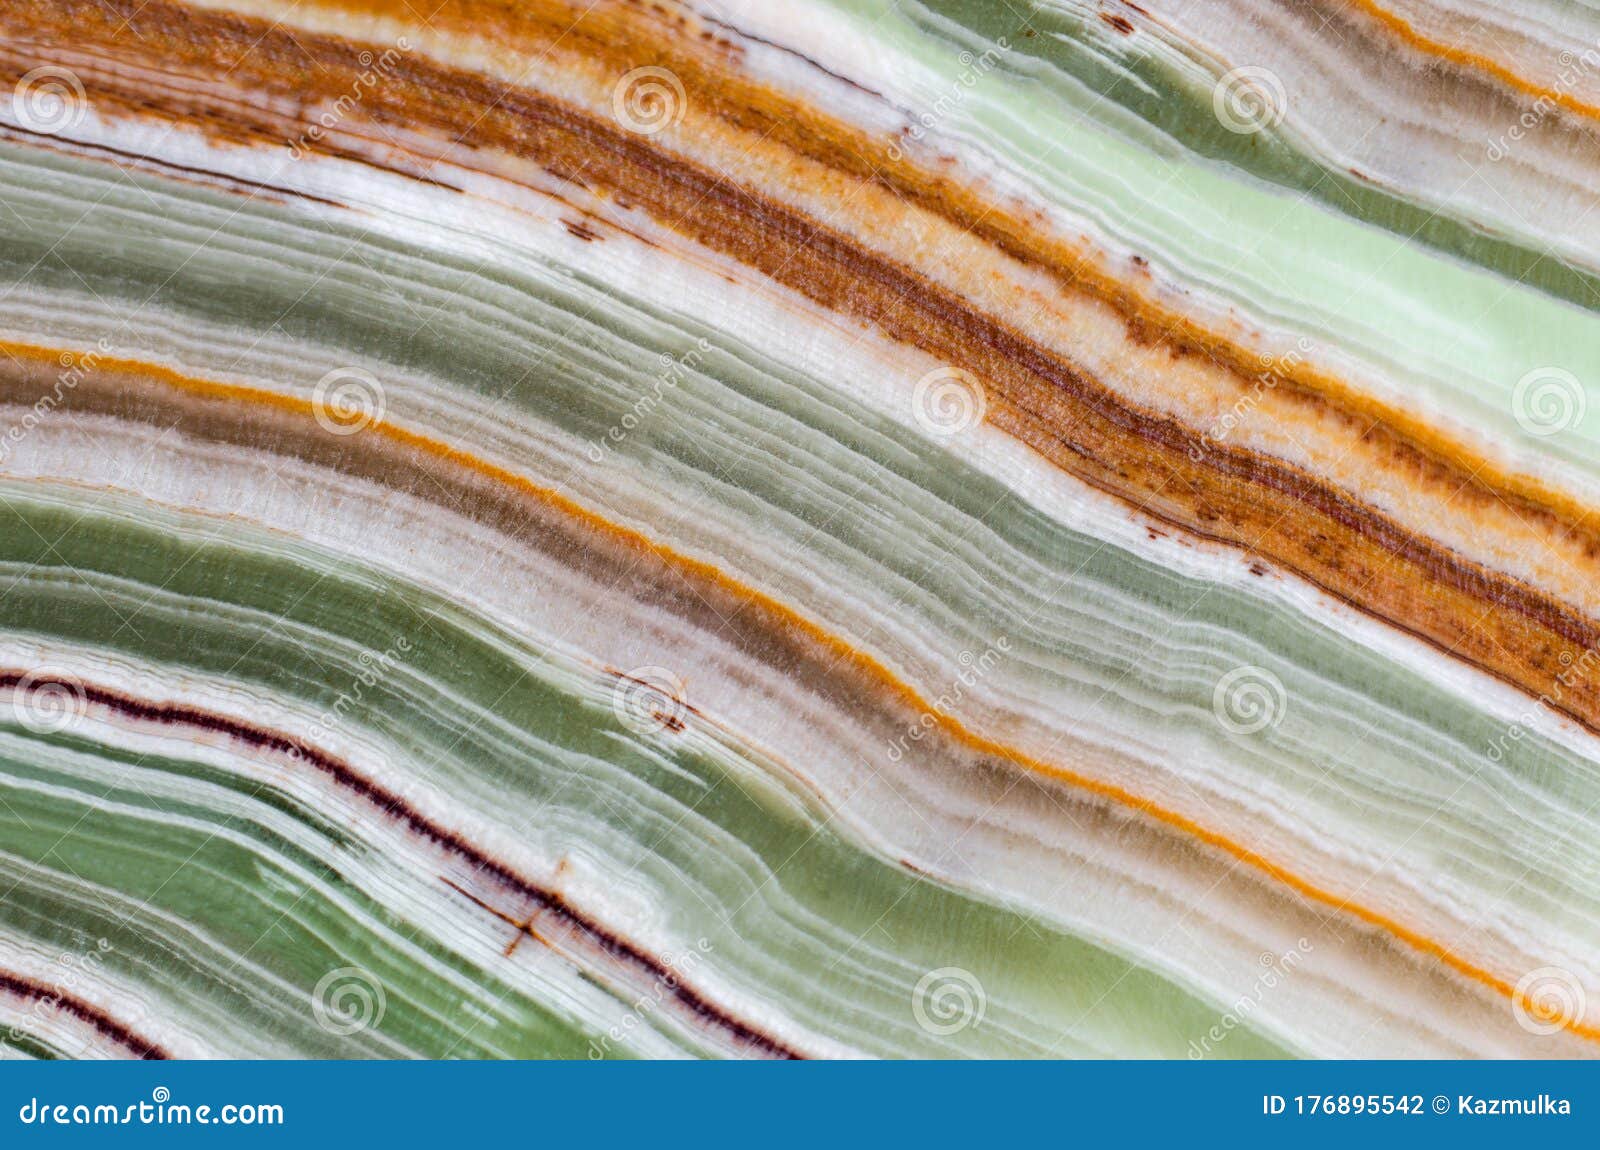 onyx gemstone texture close up. green, white, brown and orange stripes. natural stone mineral background